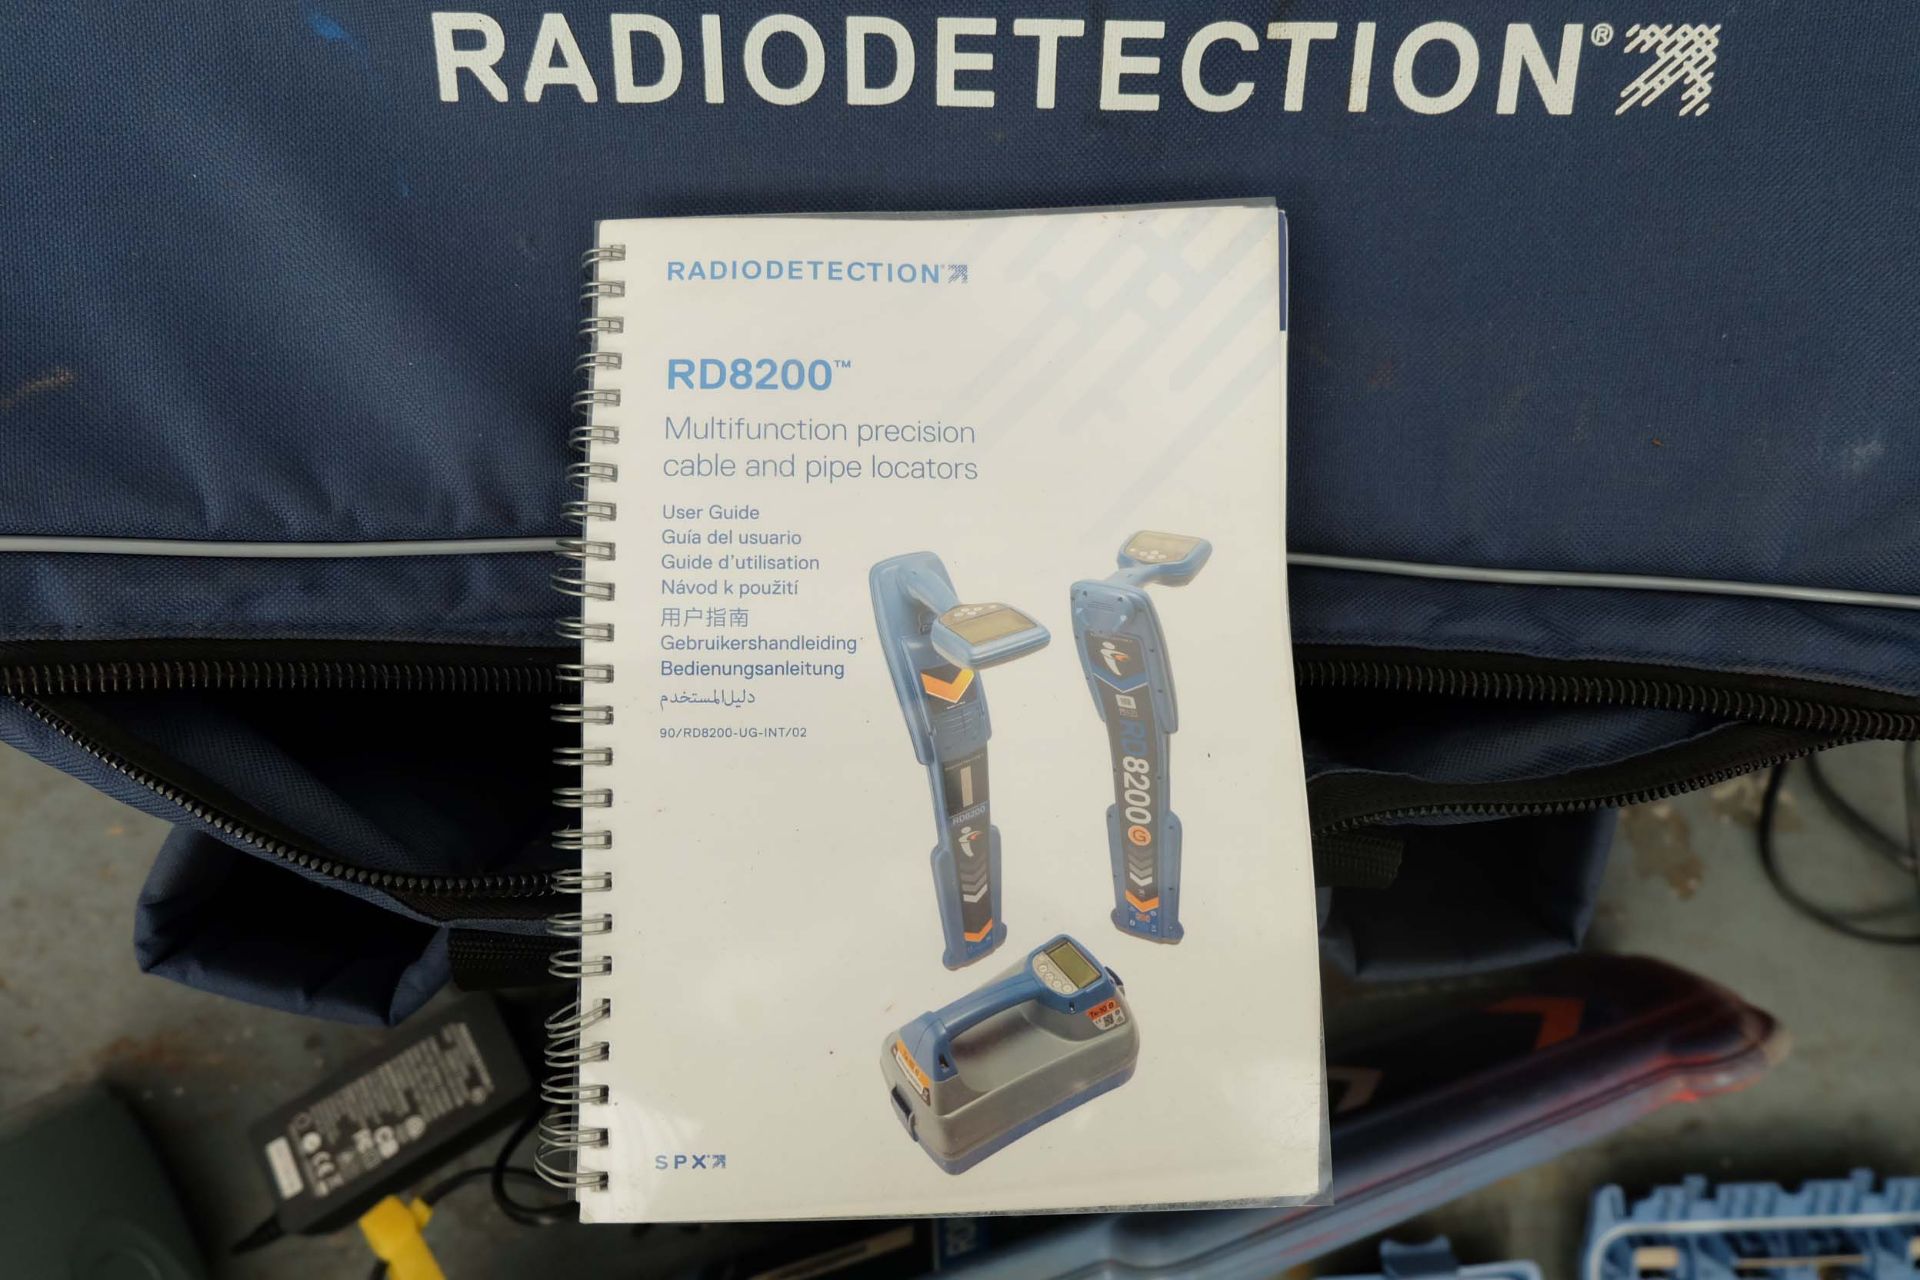 Radiodetection Model RD8200 Multifunction Precision Cable & Pipe Locator. - Image 14 of 16